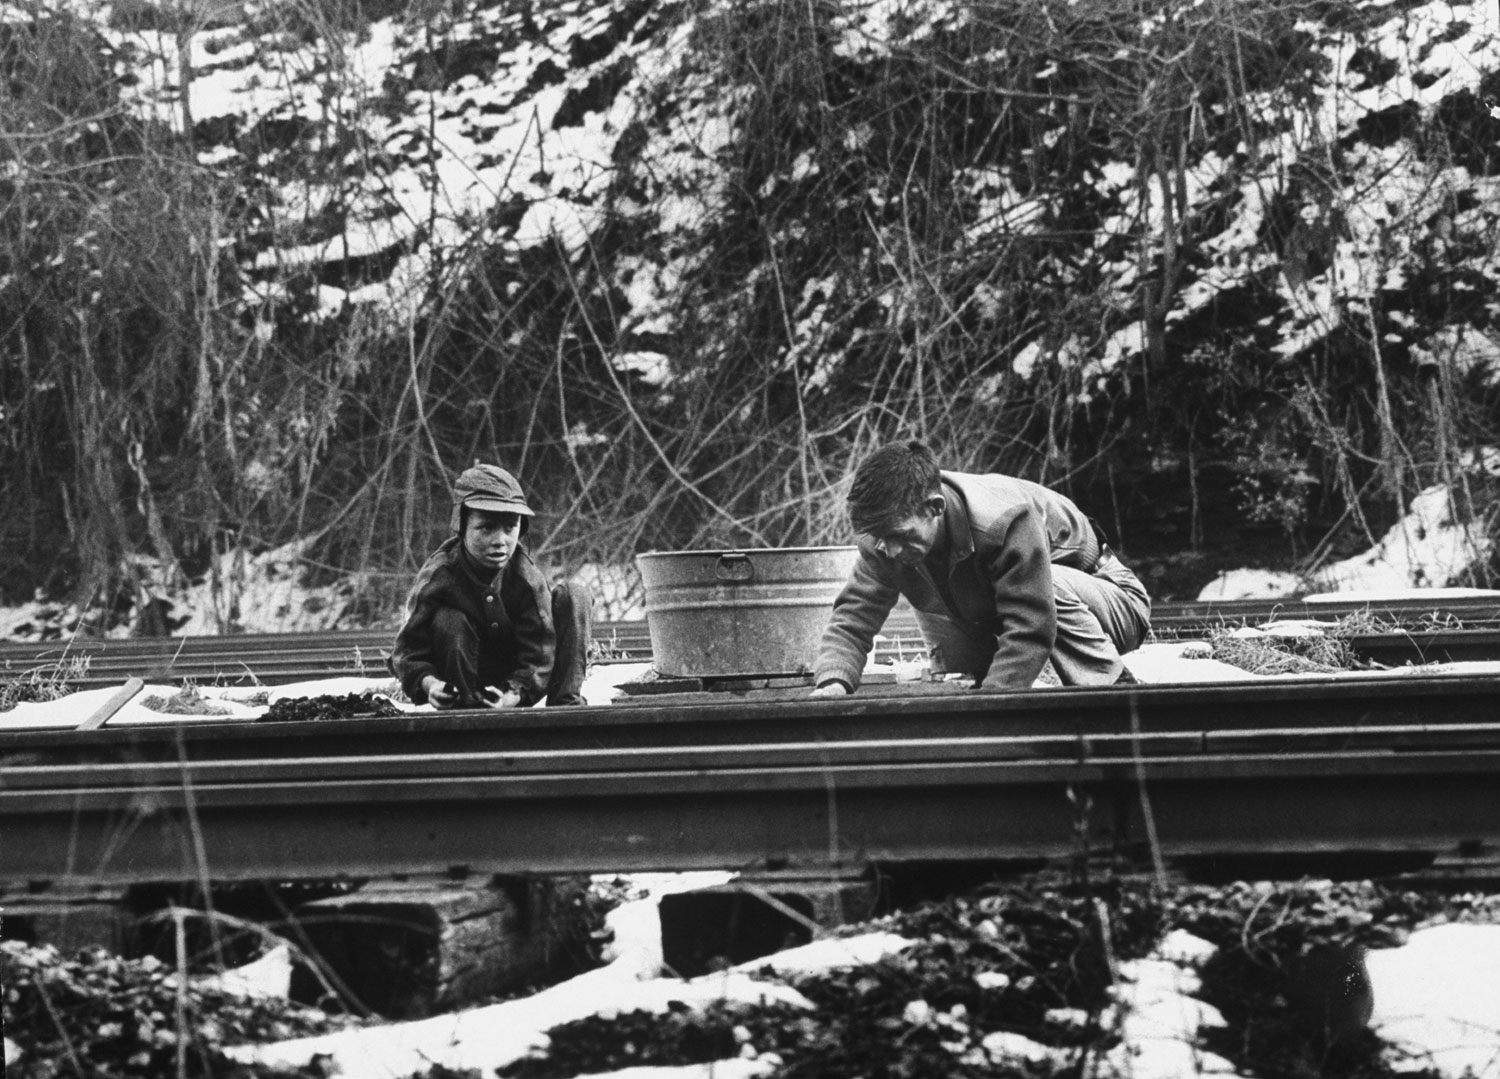 Tearing with bare hands at frozen lumps of coal, Willard Bryant and his son Billy crouch between railroad tracks, scavenging fuel to heat their home. When the tub is full, they will drag it to the hill where they live, reload the coal into bags and carry it on their backs to the house.